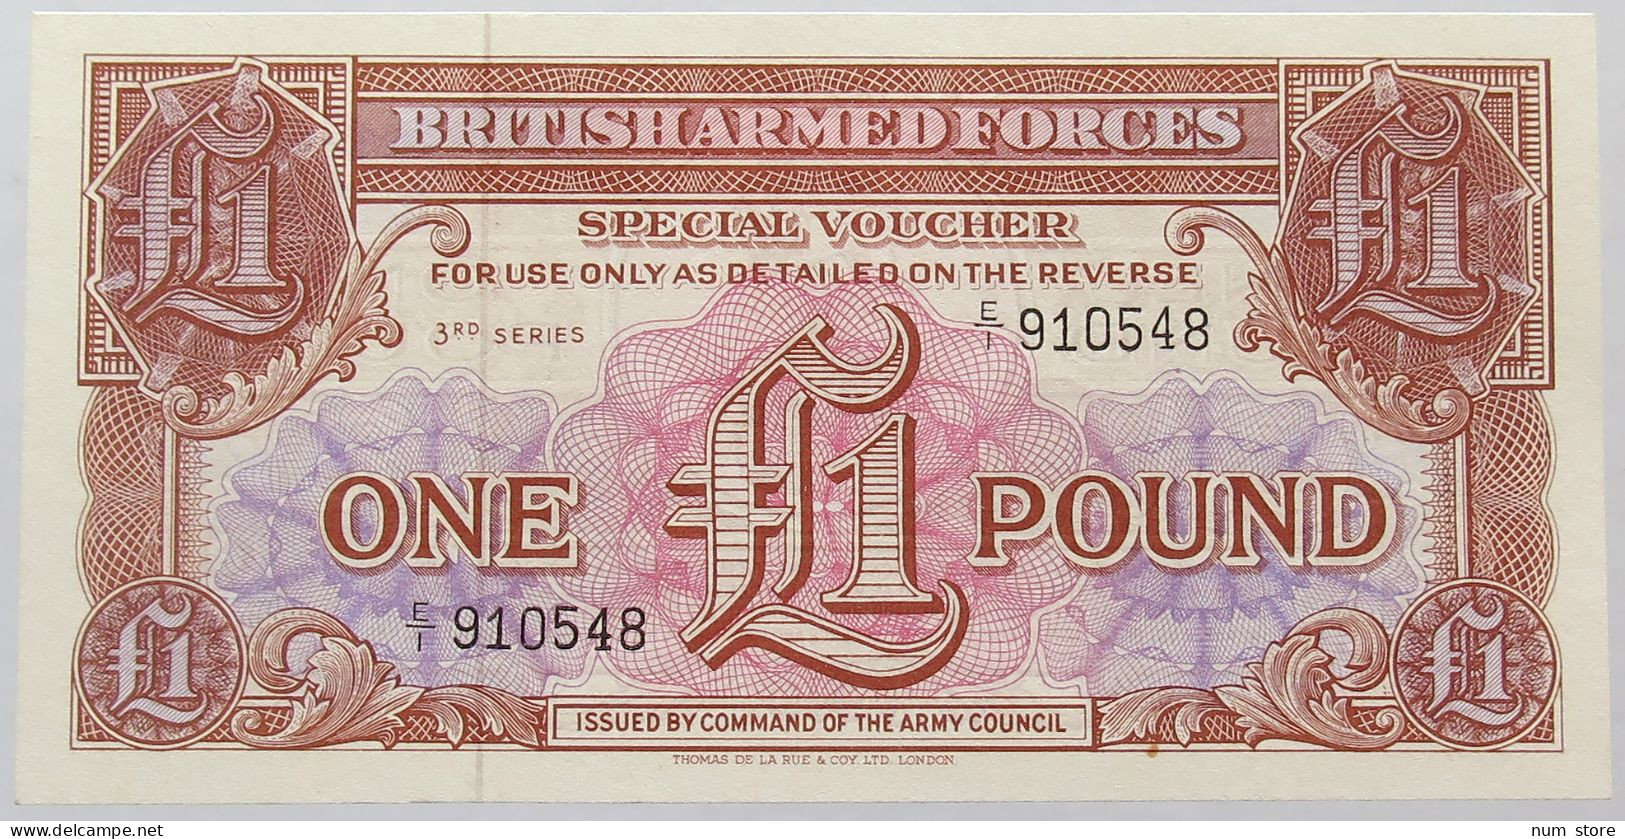 BRITISH ARMED FORCES 1 POUND TOP #alb016 0329 - British Armed Forces & Special Vouchers